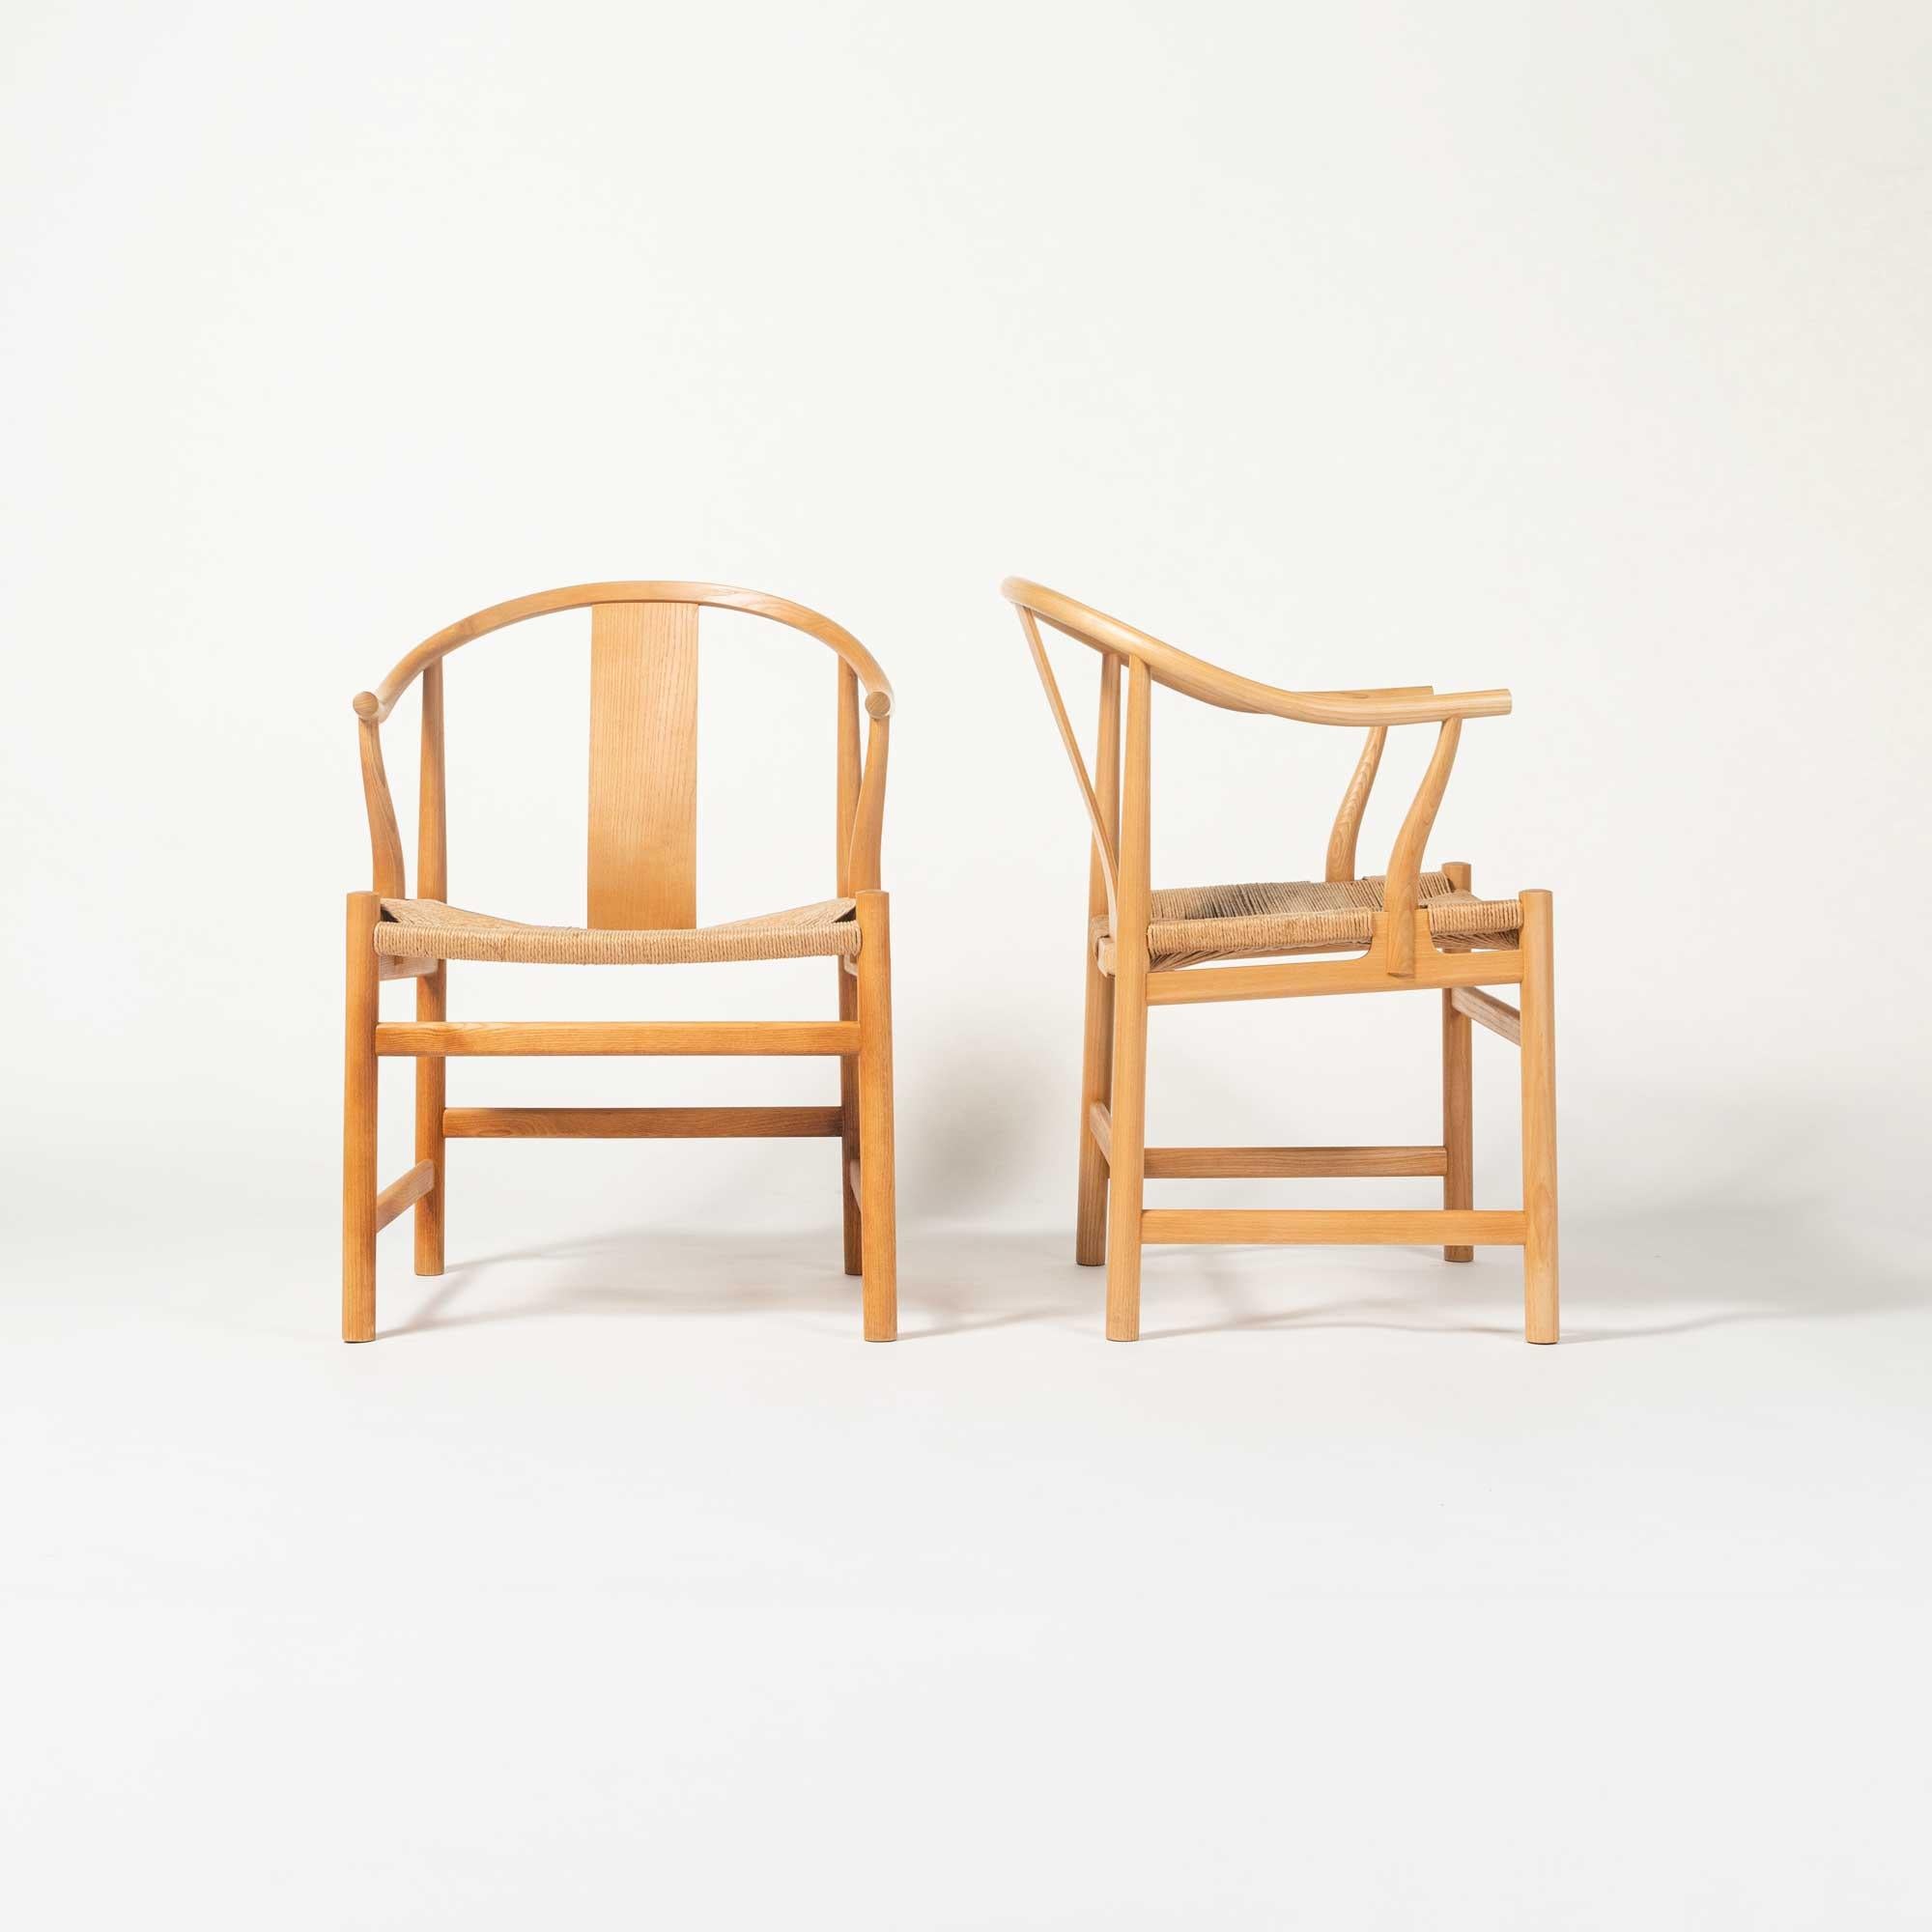 At the Cabinetmakers' Guild's Autumn Exhibition in 1943, Wegner presented his first version of a chair inspired by an old Chinese chair, which he had seen at the Danish Museum of Industrial Arts. Since then, more versions have appeared. The